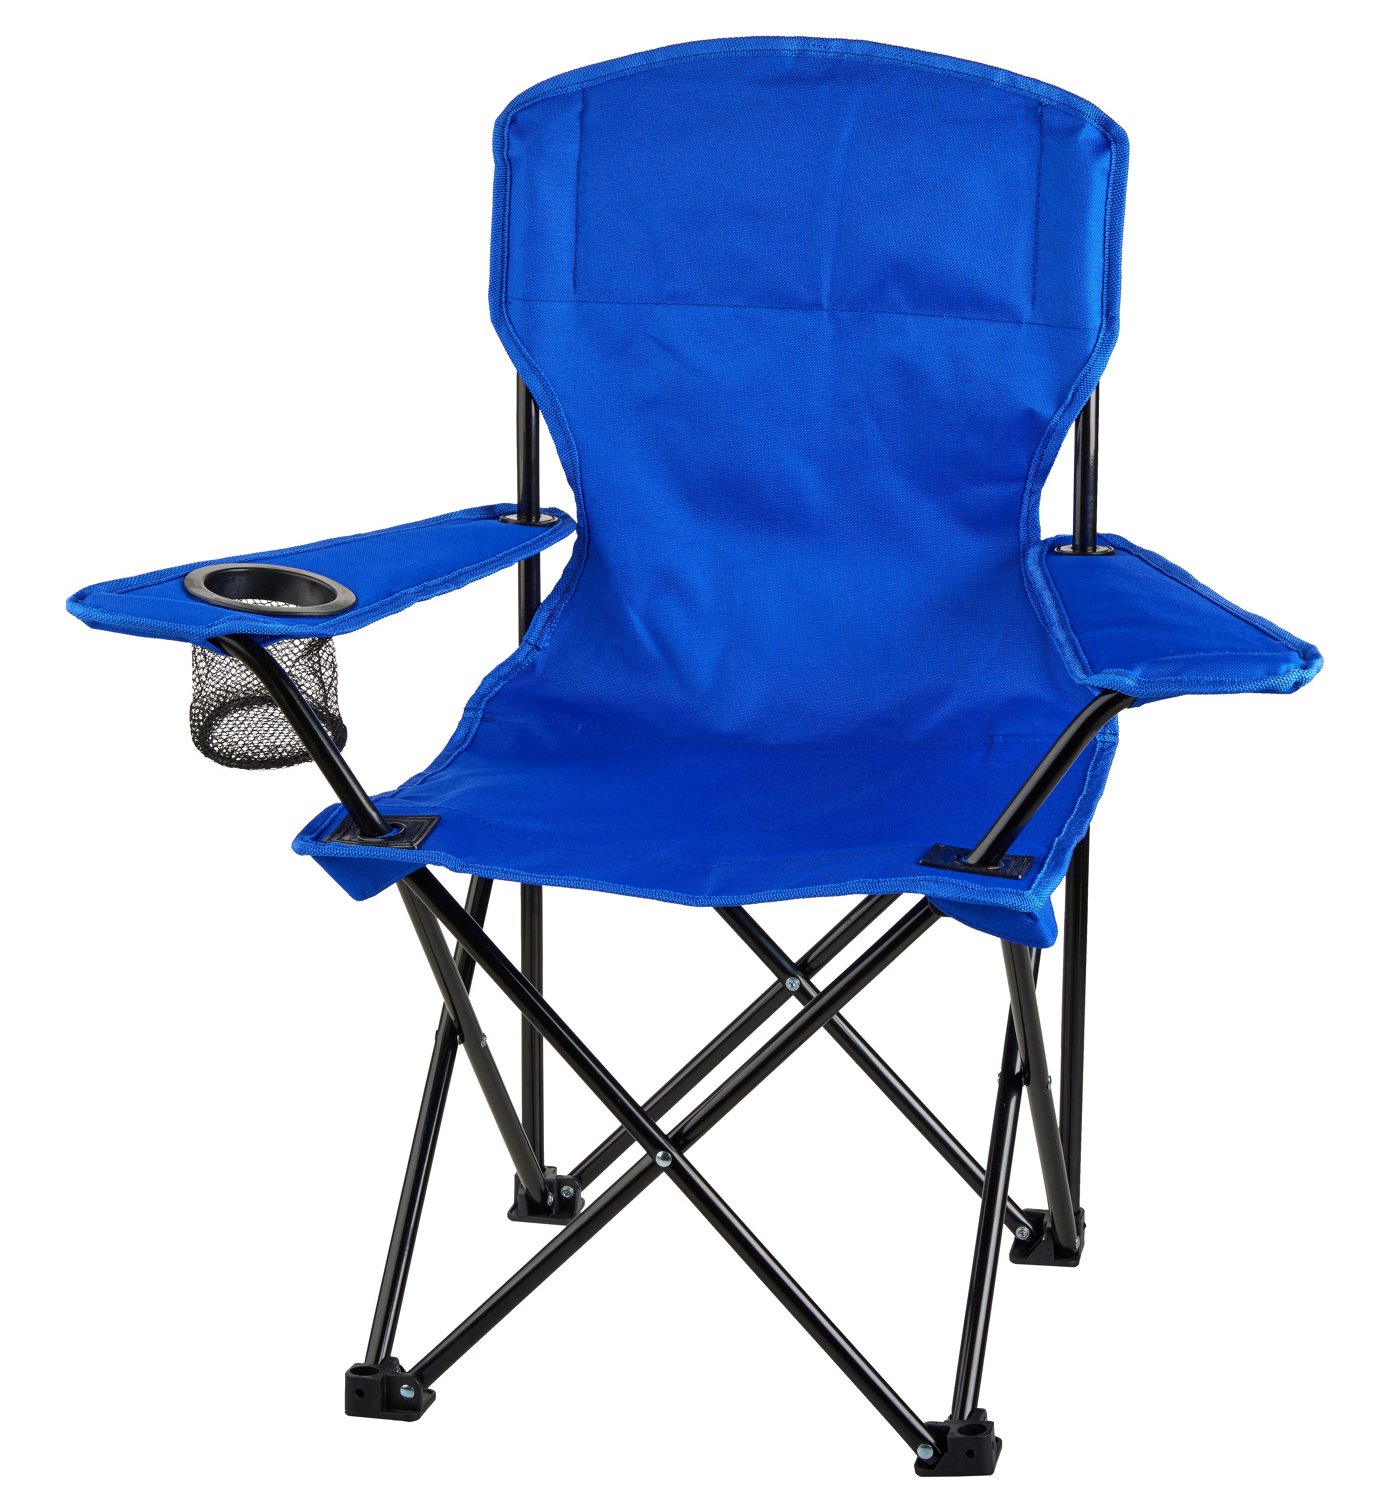 Personalised Outdoor Stool for Him, Camping Folding Seat, Portable